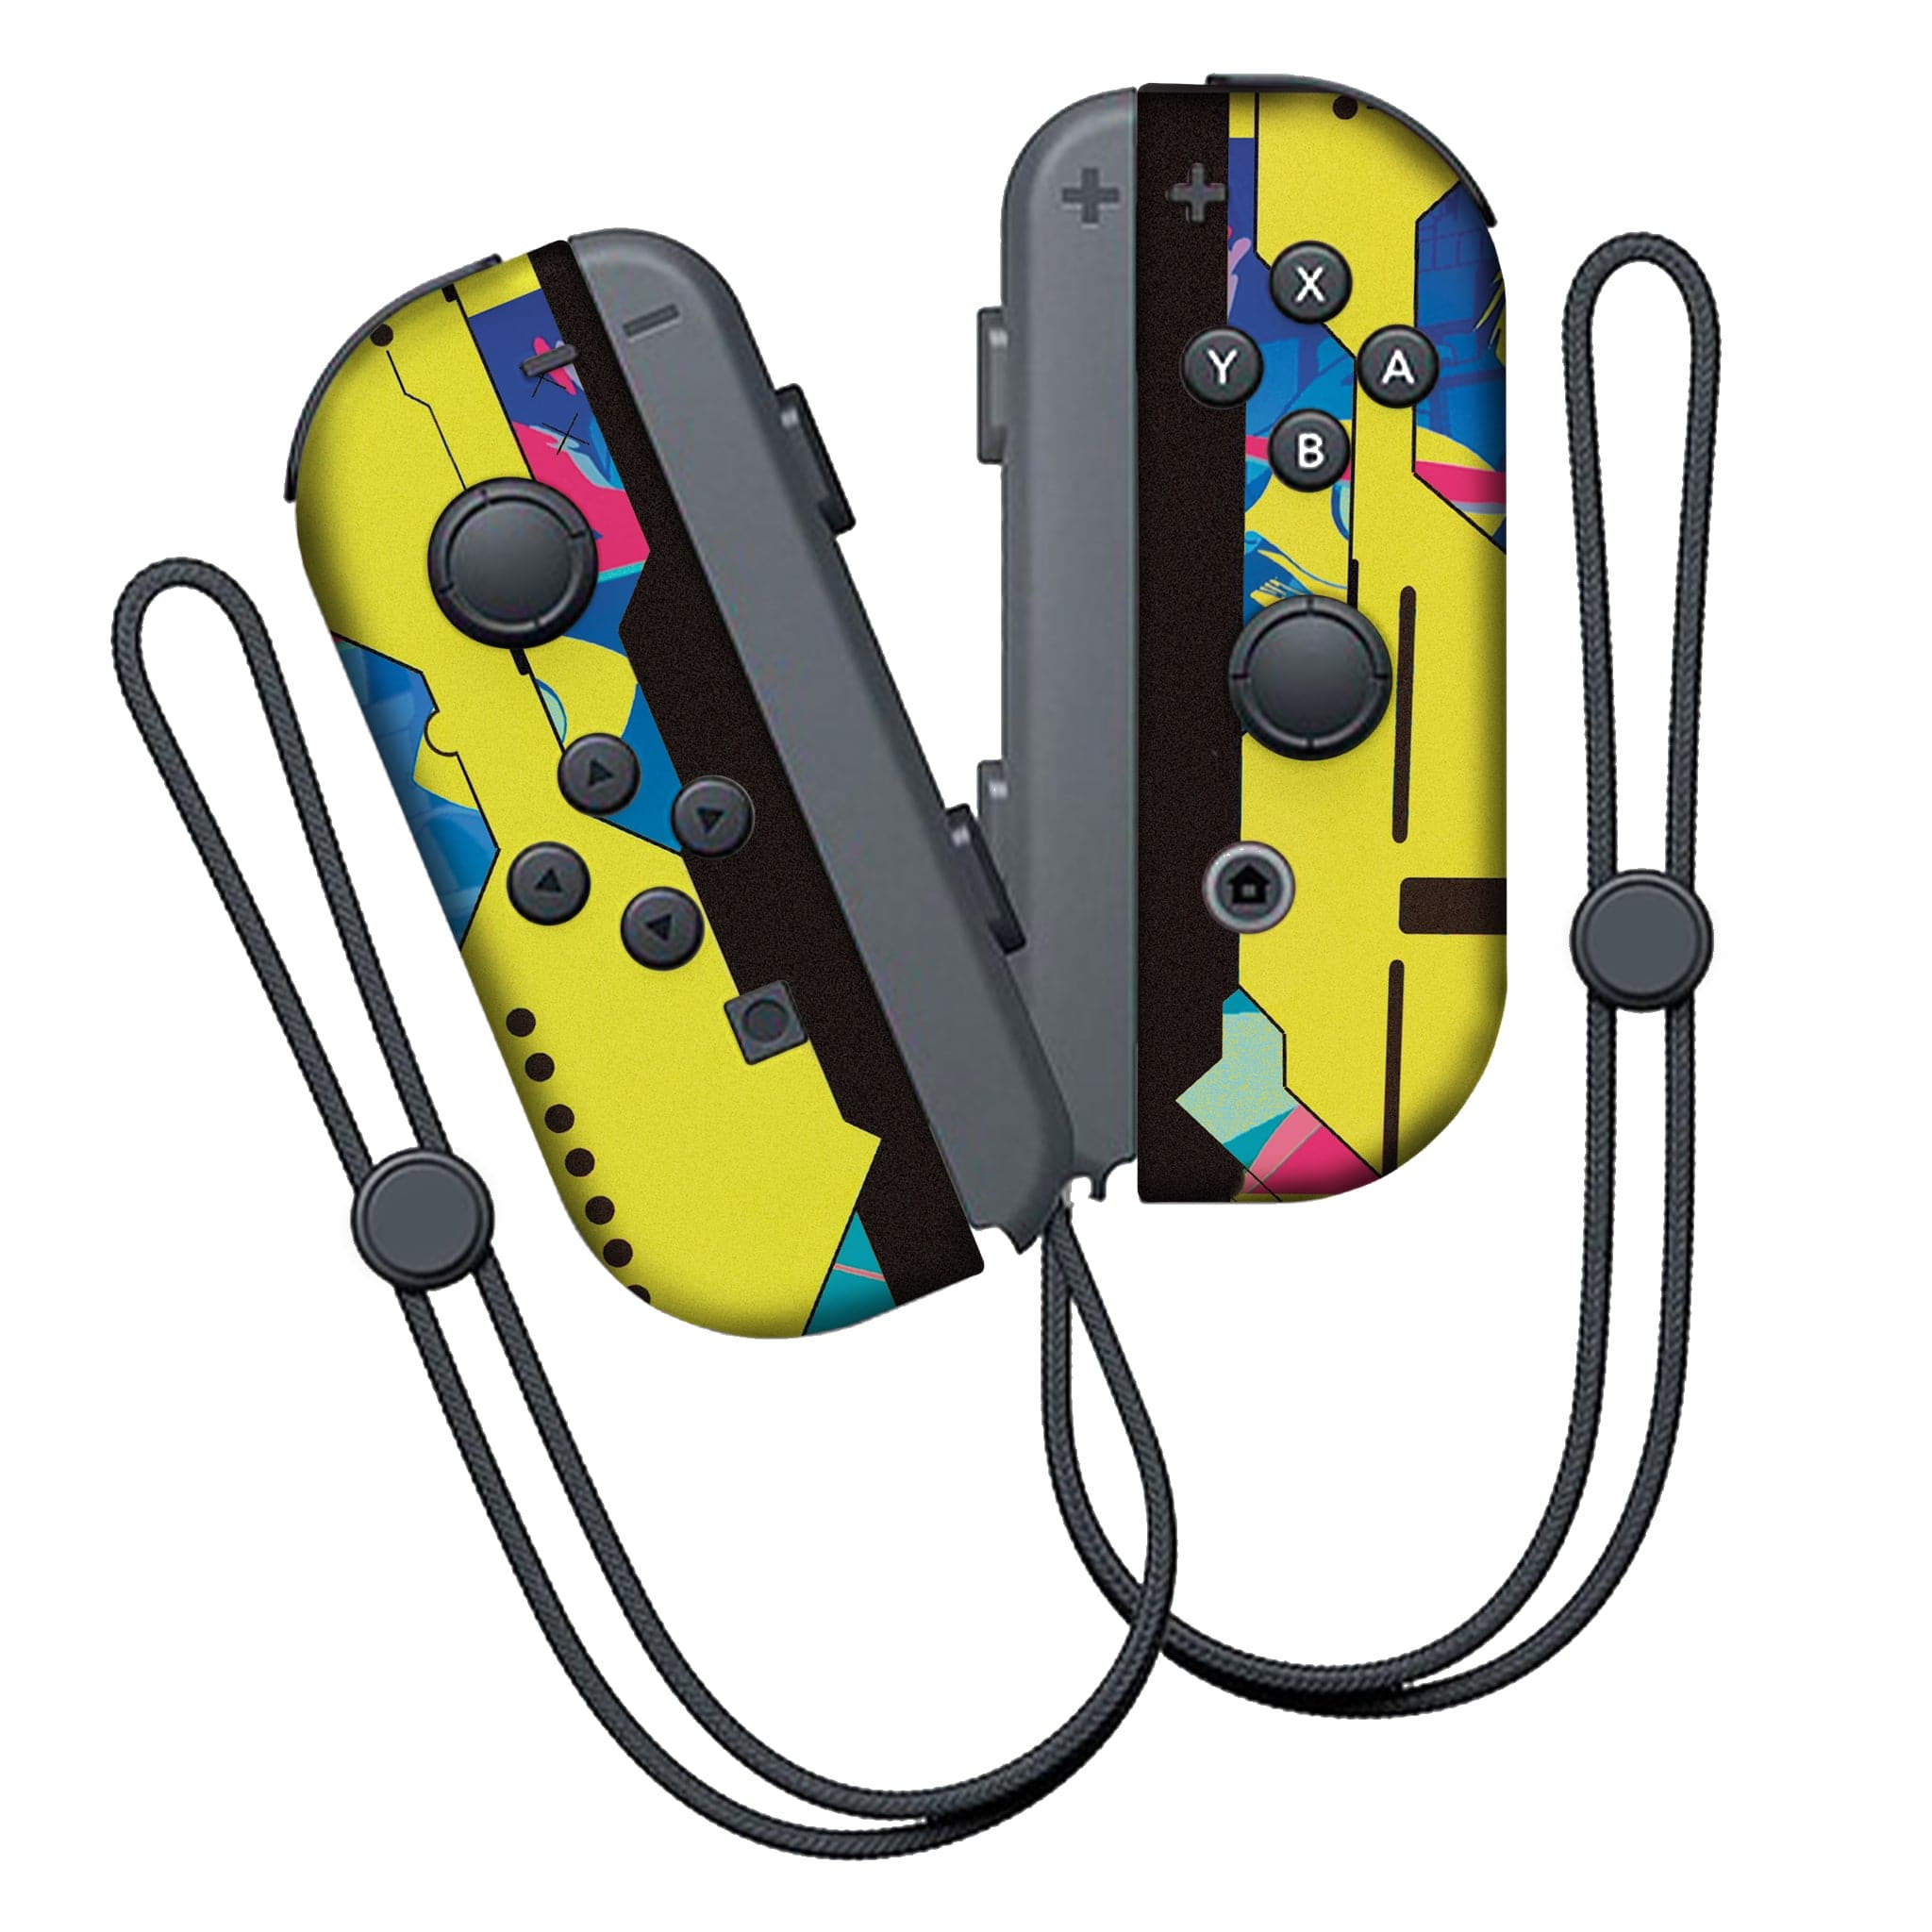 Cyberpunk series Inspired Nintendo Switch Joy-Con Left and Right Switch Controllers by Nintendo